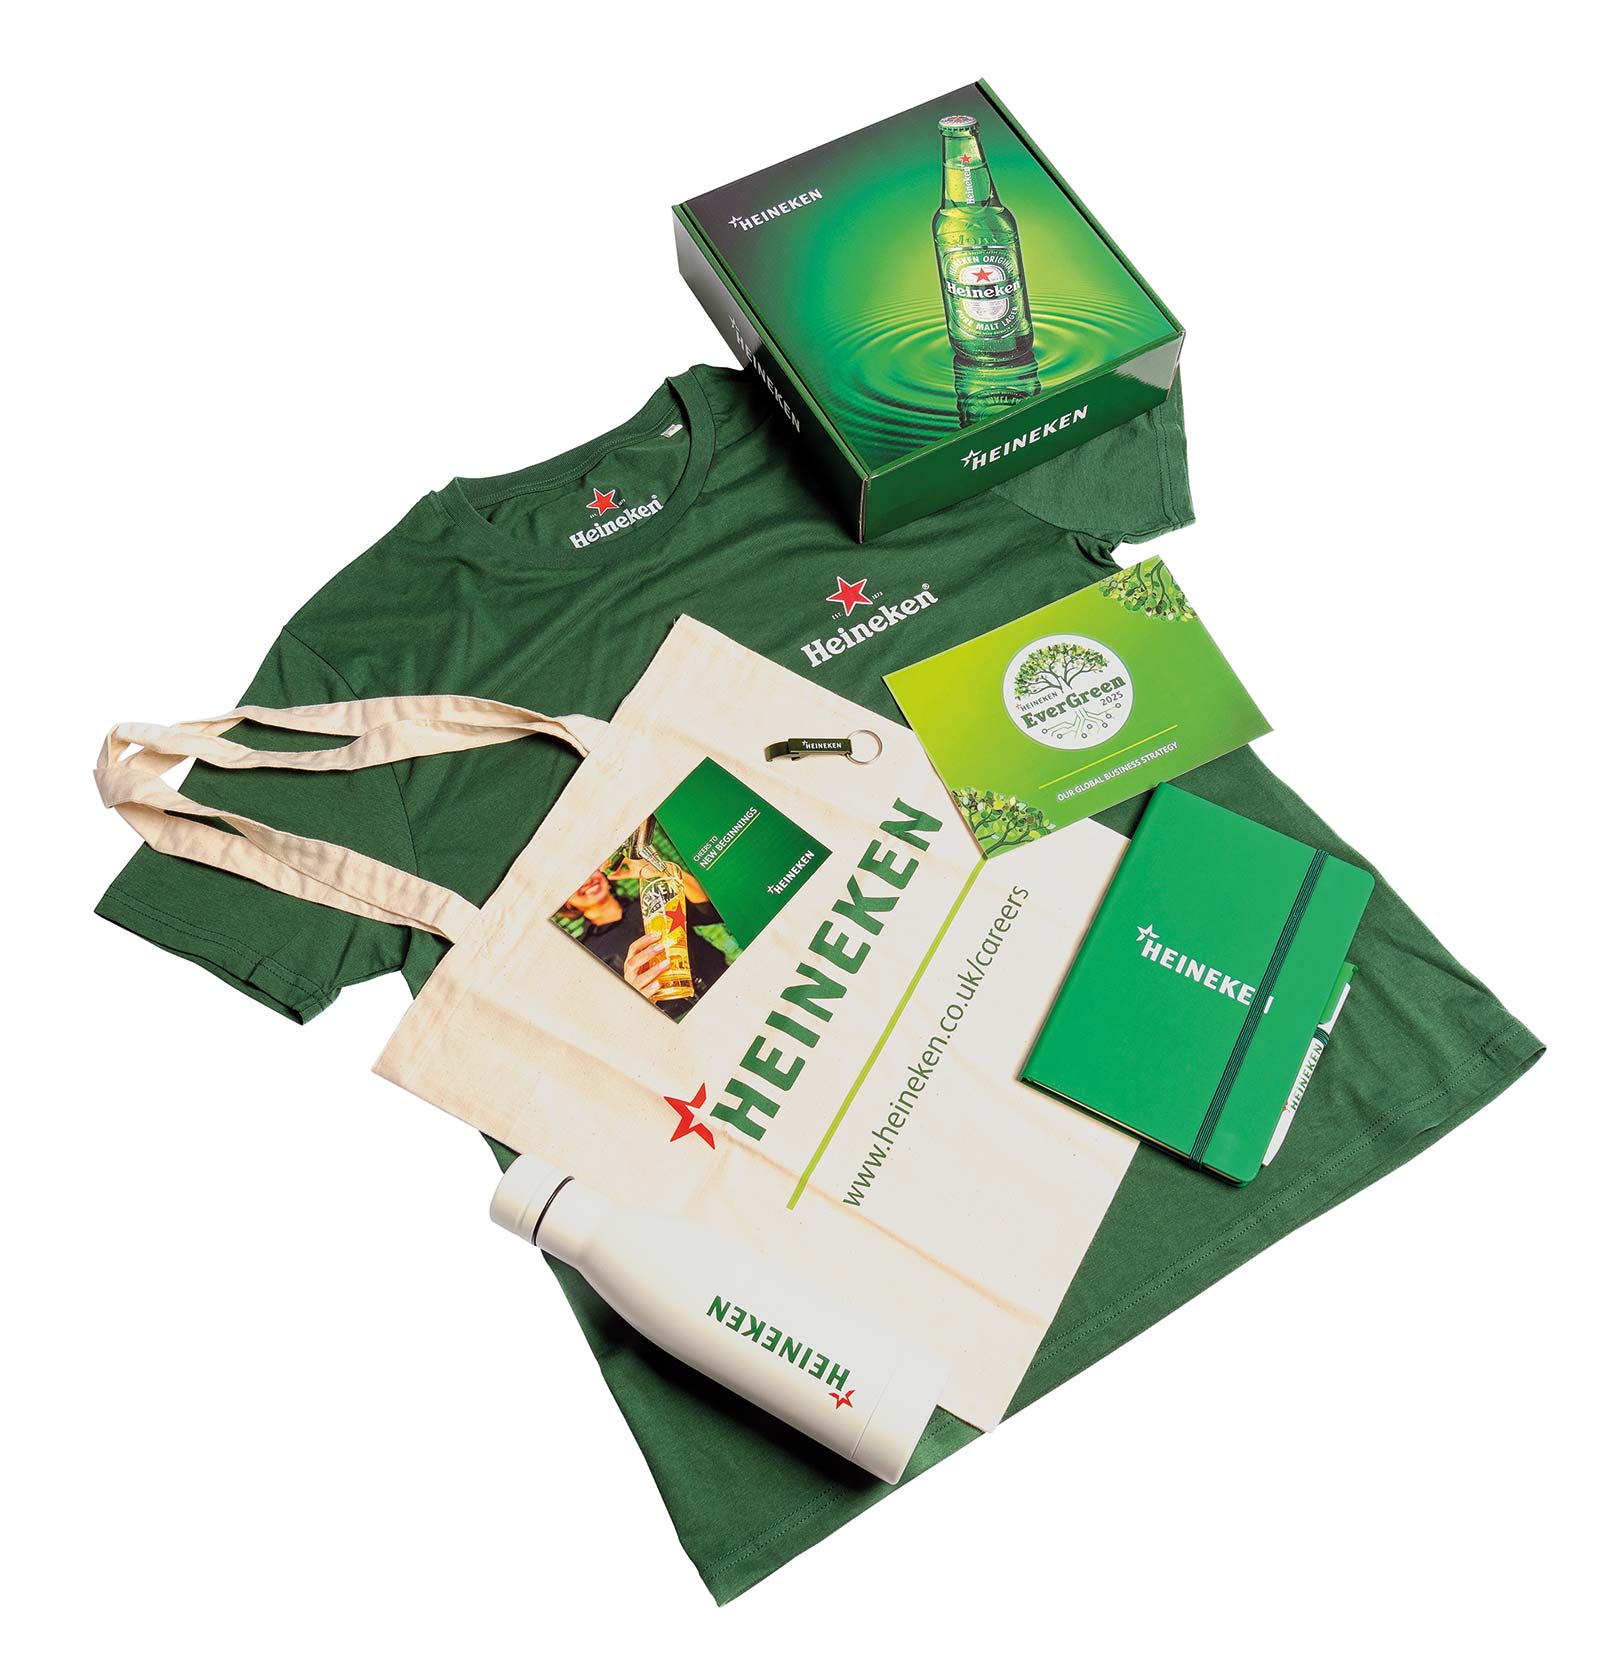 New starter hamper for Heineken employees, delivered by I-Tel Group. Employee Engagement, People Solutions, Onboarding